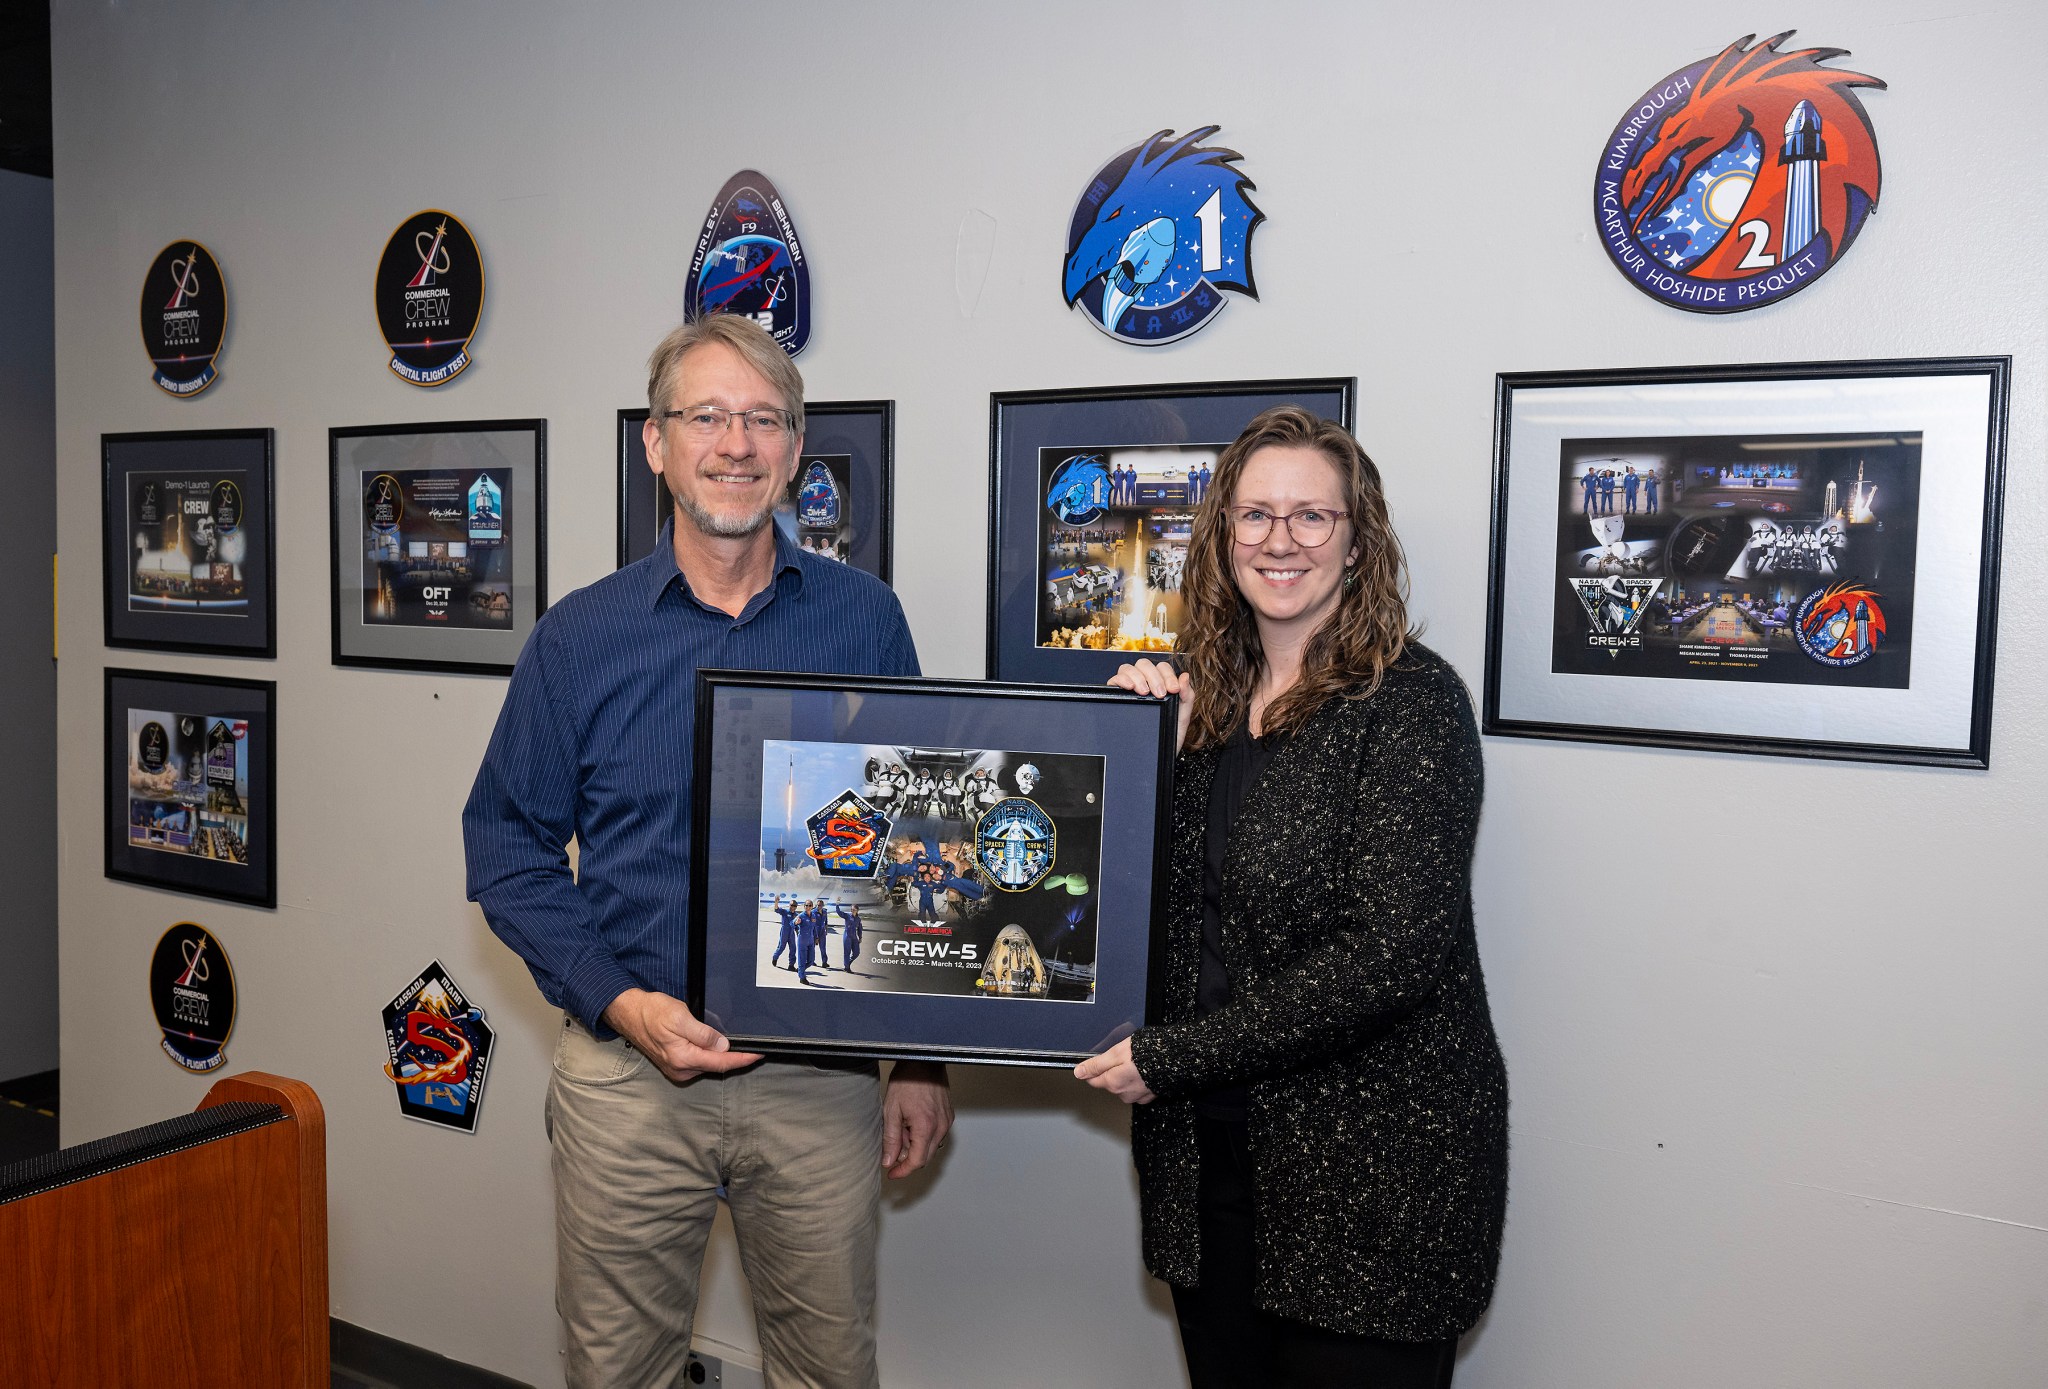 Dave Gwaltney, left, Launch Vehicle Systems Office technical assistant and Lisa McCollum, Marshall’s Commercial Crew Program Launch Vehicle Safety Office deputy manager, hold the Crew-5 mission plaque together as they smile.